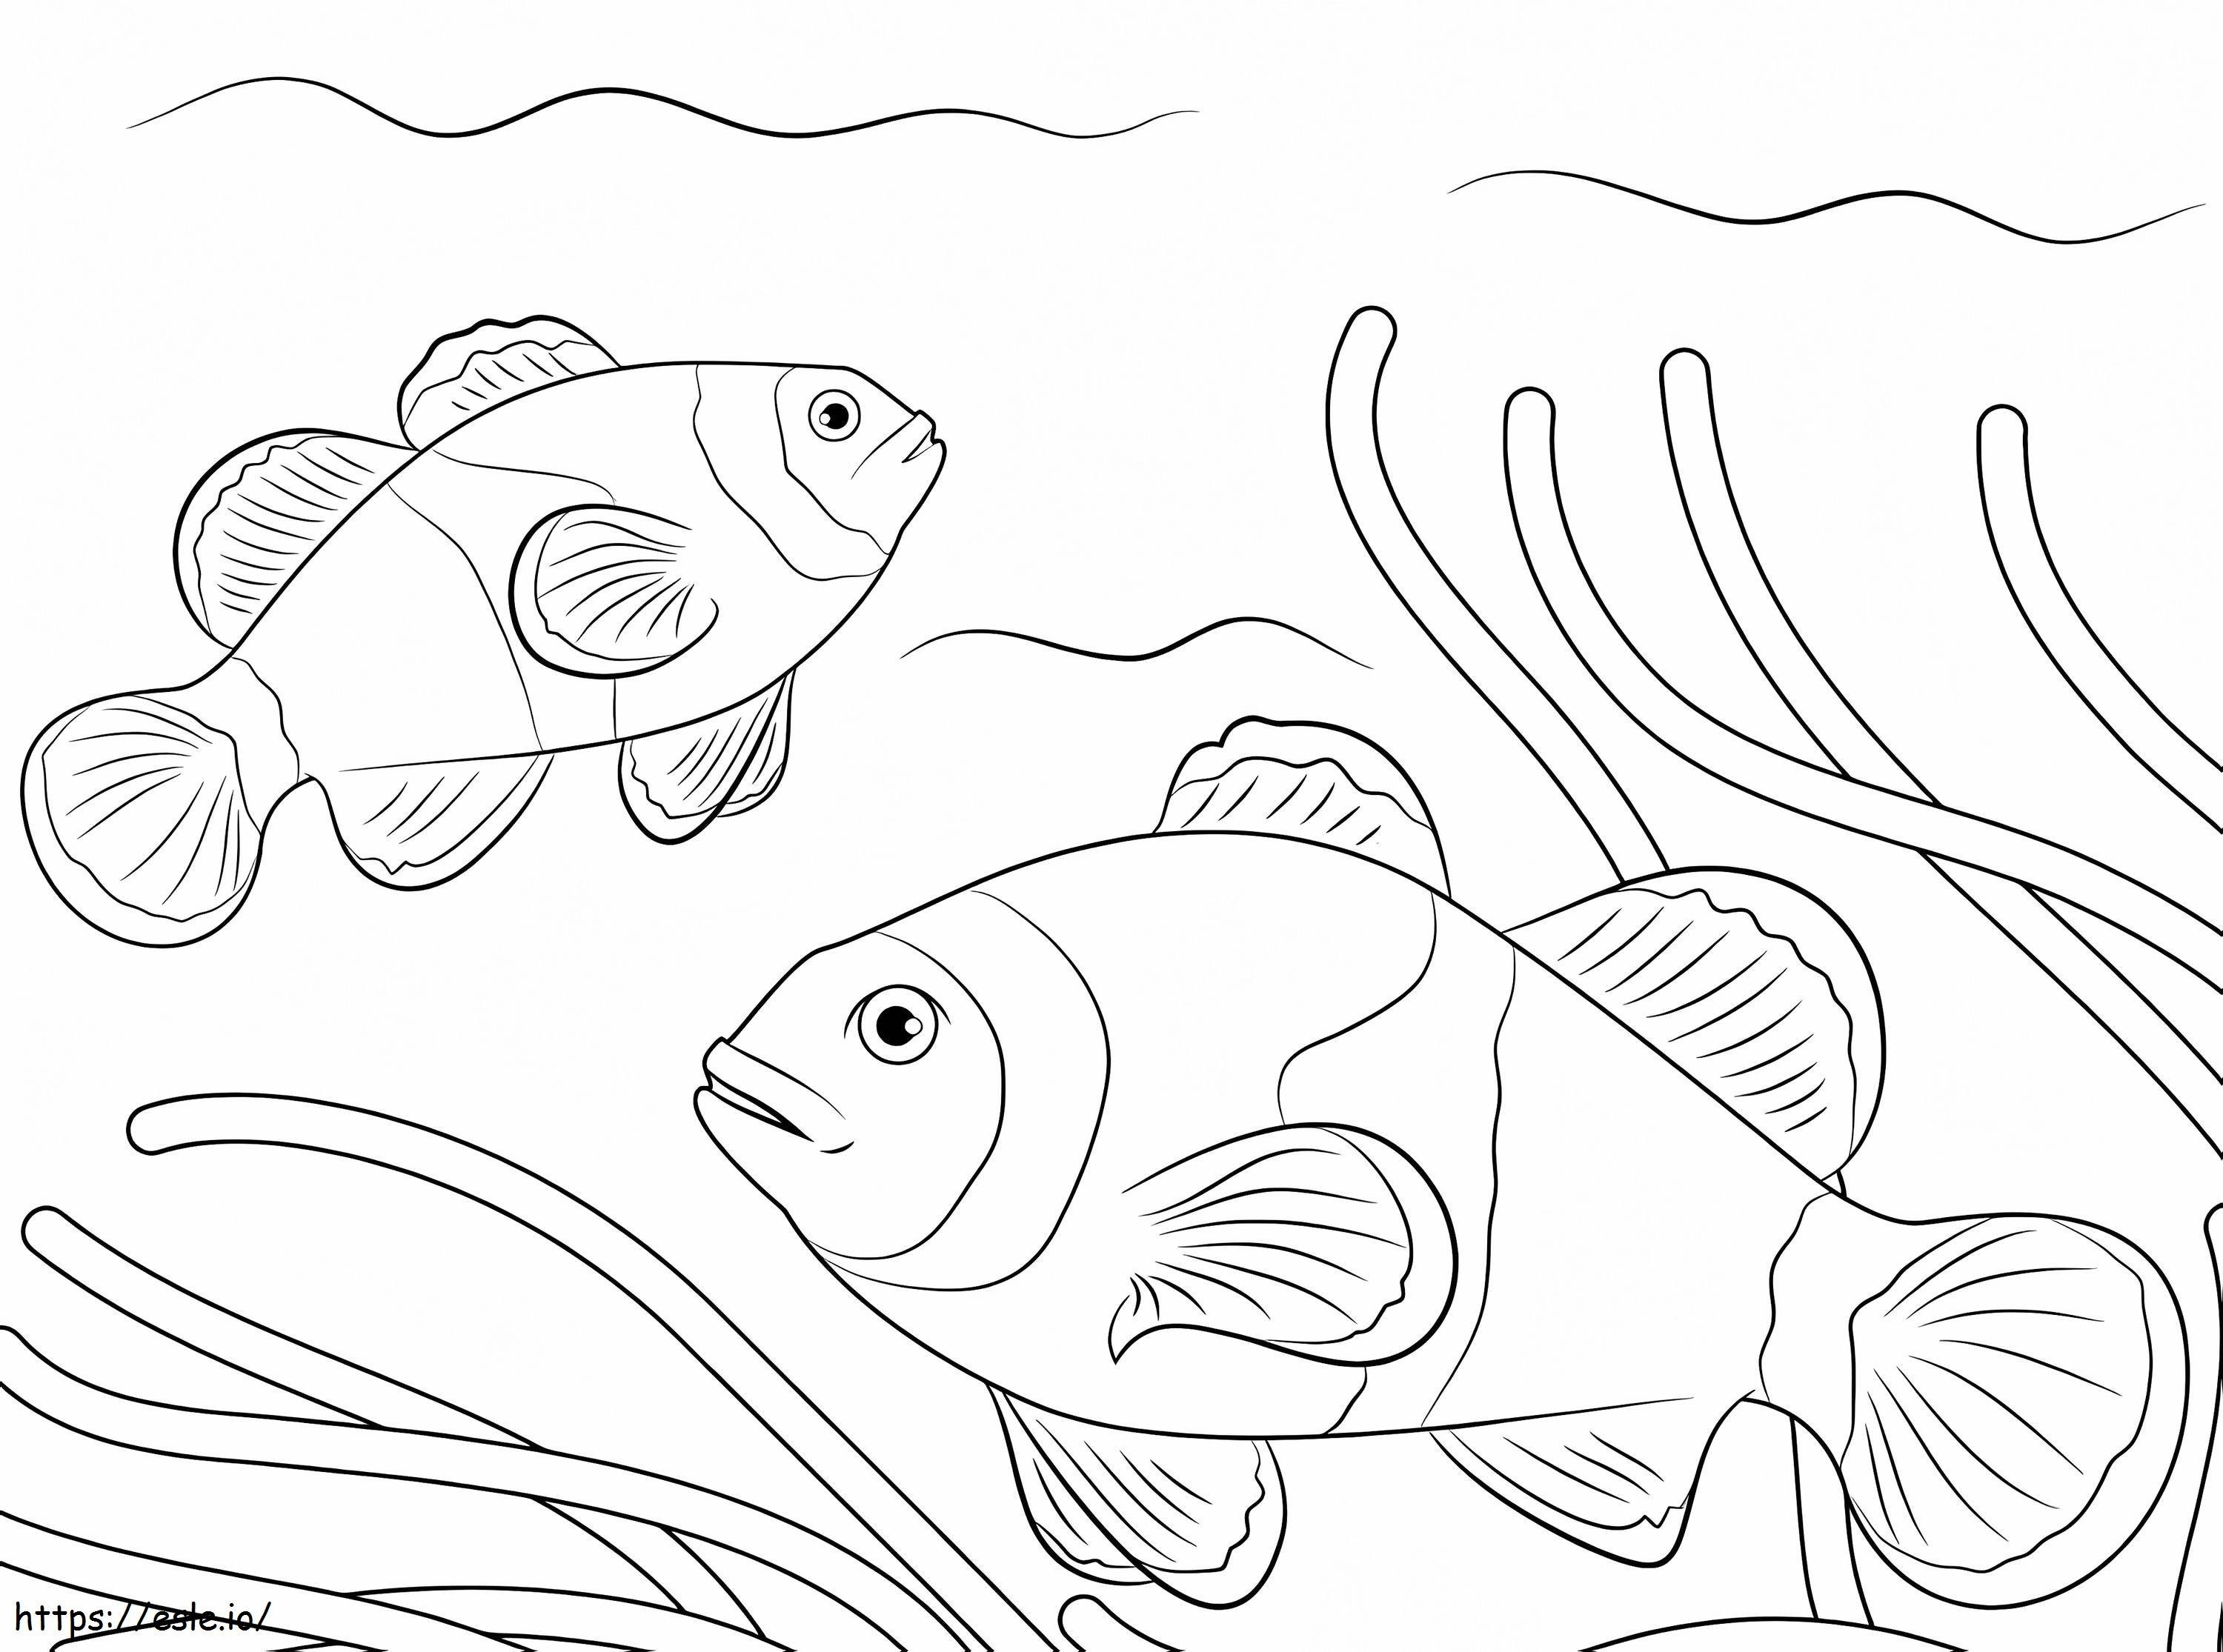 Ocellaris Clownfishes coloring page